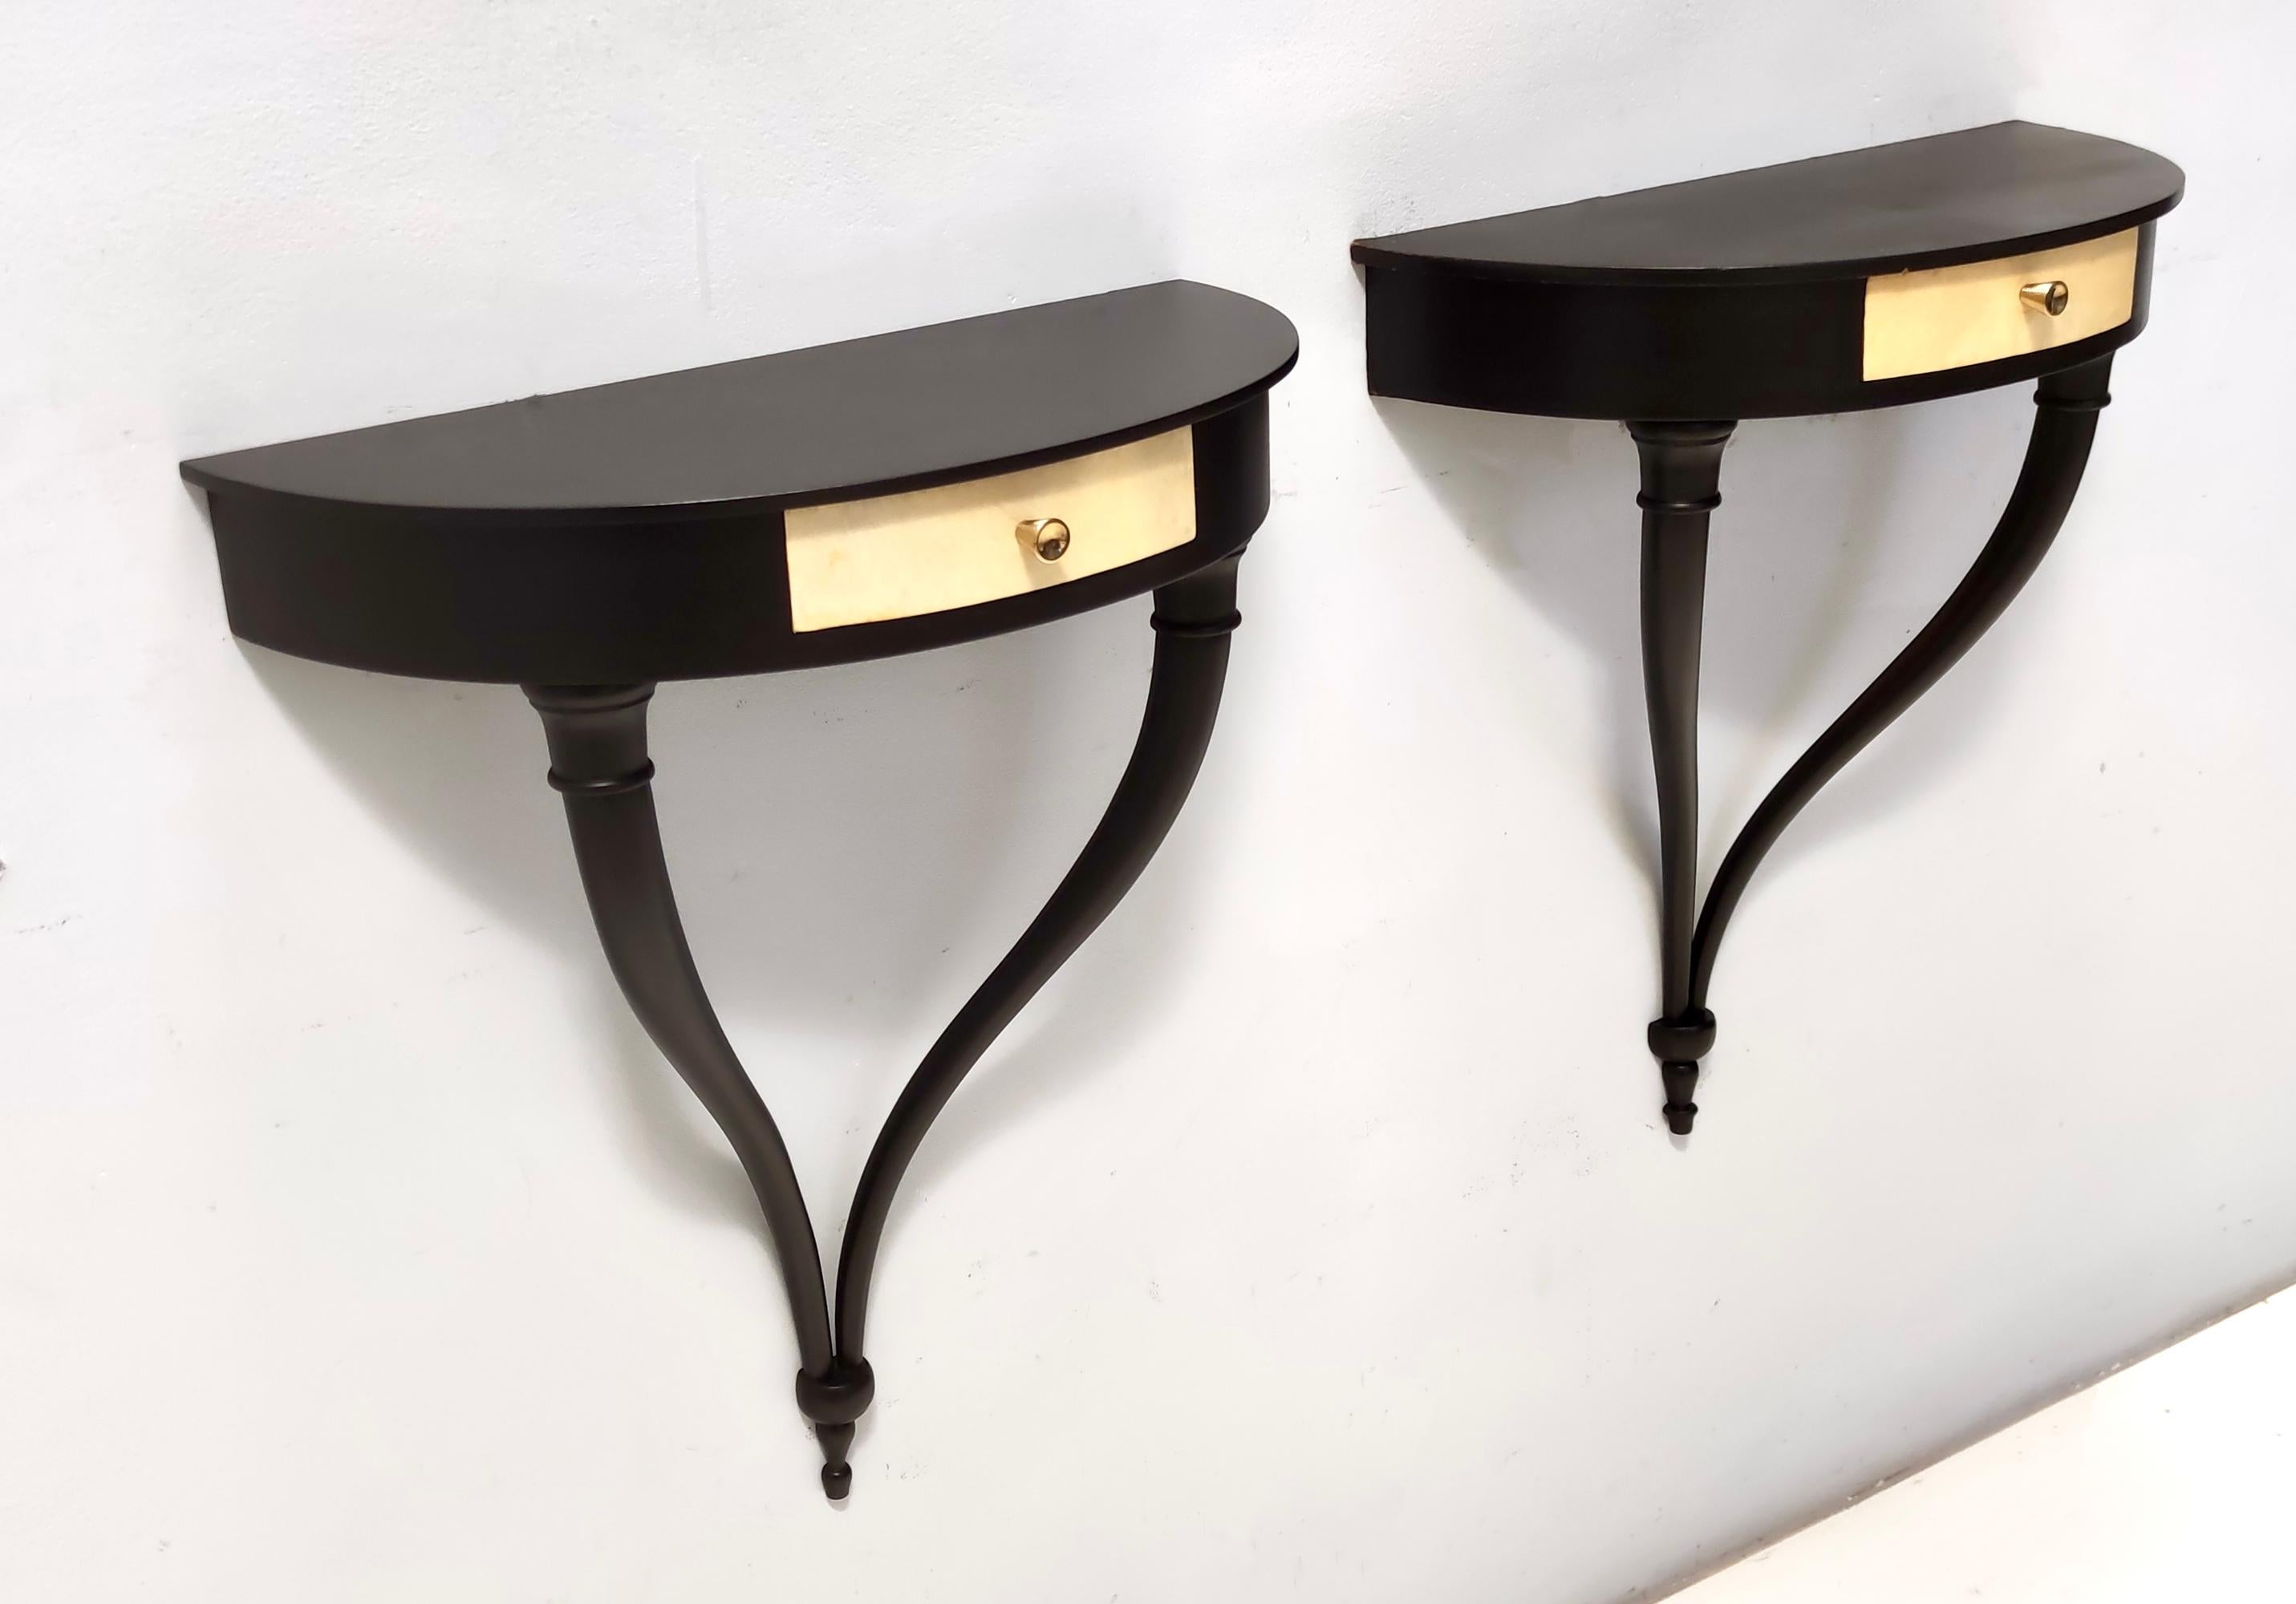 Ebonized Pair of Wall-Mounted Console Tables / Nightstands by Guglielmo Ulrich, Italy